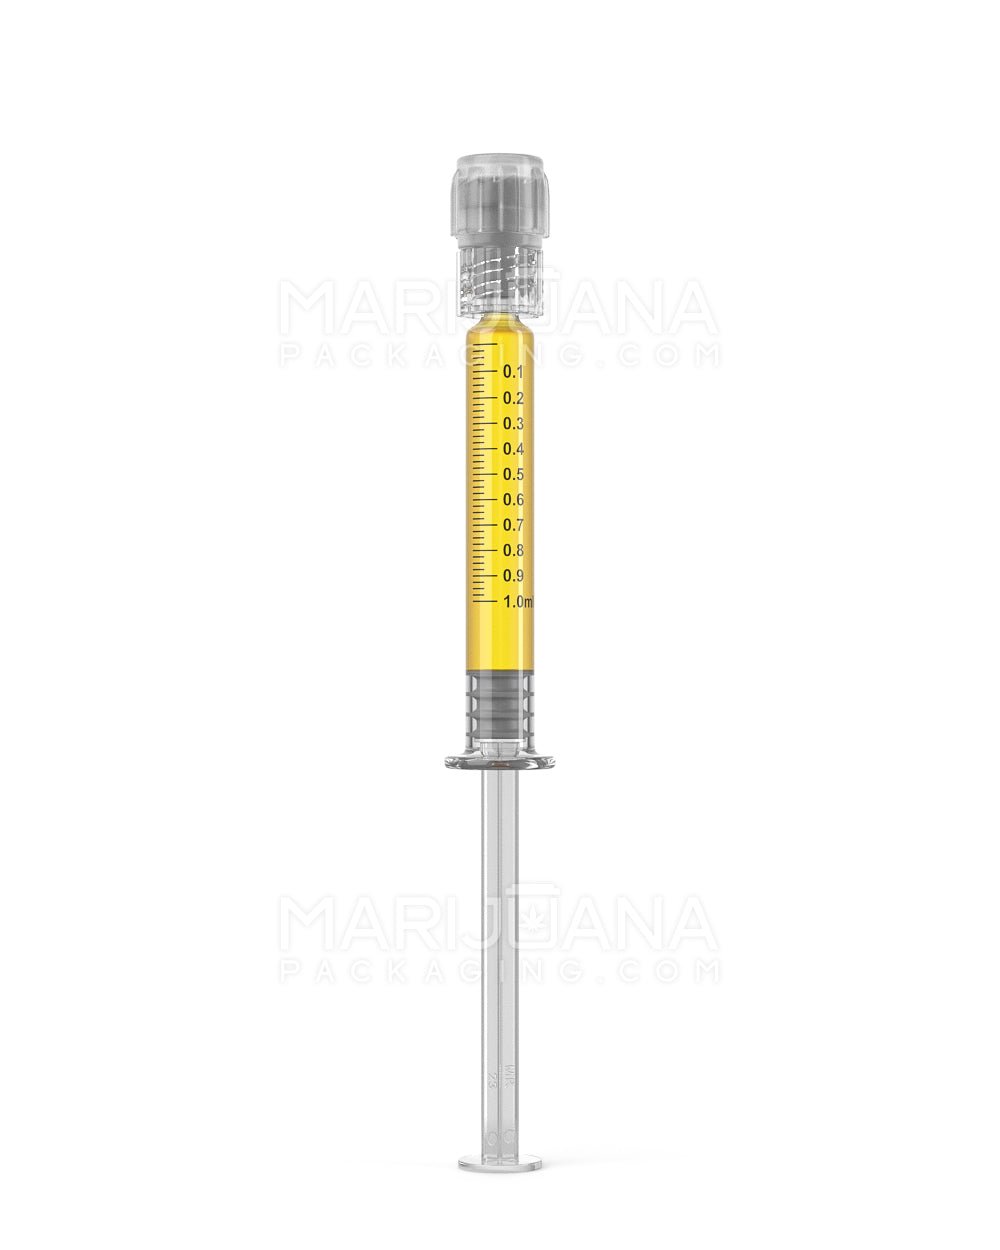 Child Resistant & Luer Lock | Long Glass Dab Applicator Syringes | 1mL - 0.1mL Increments - 100 Count - 2